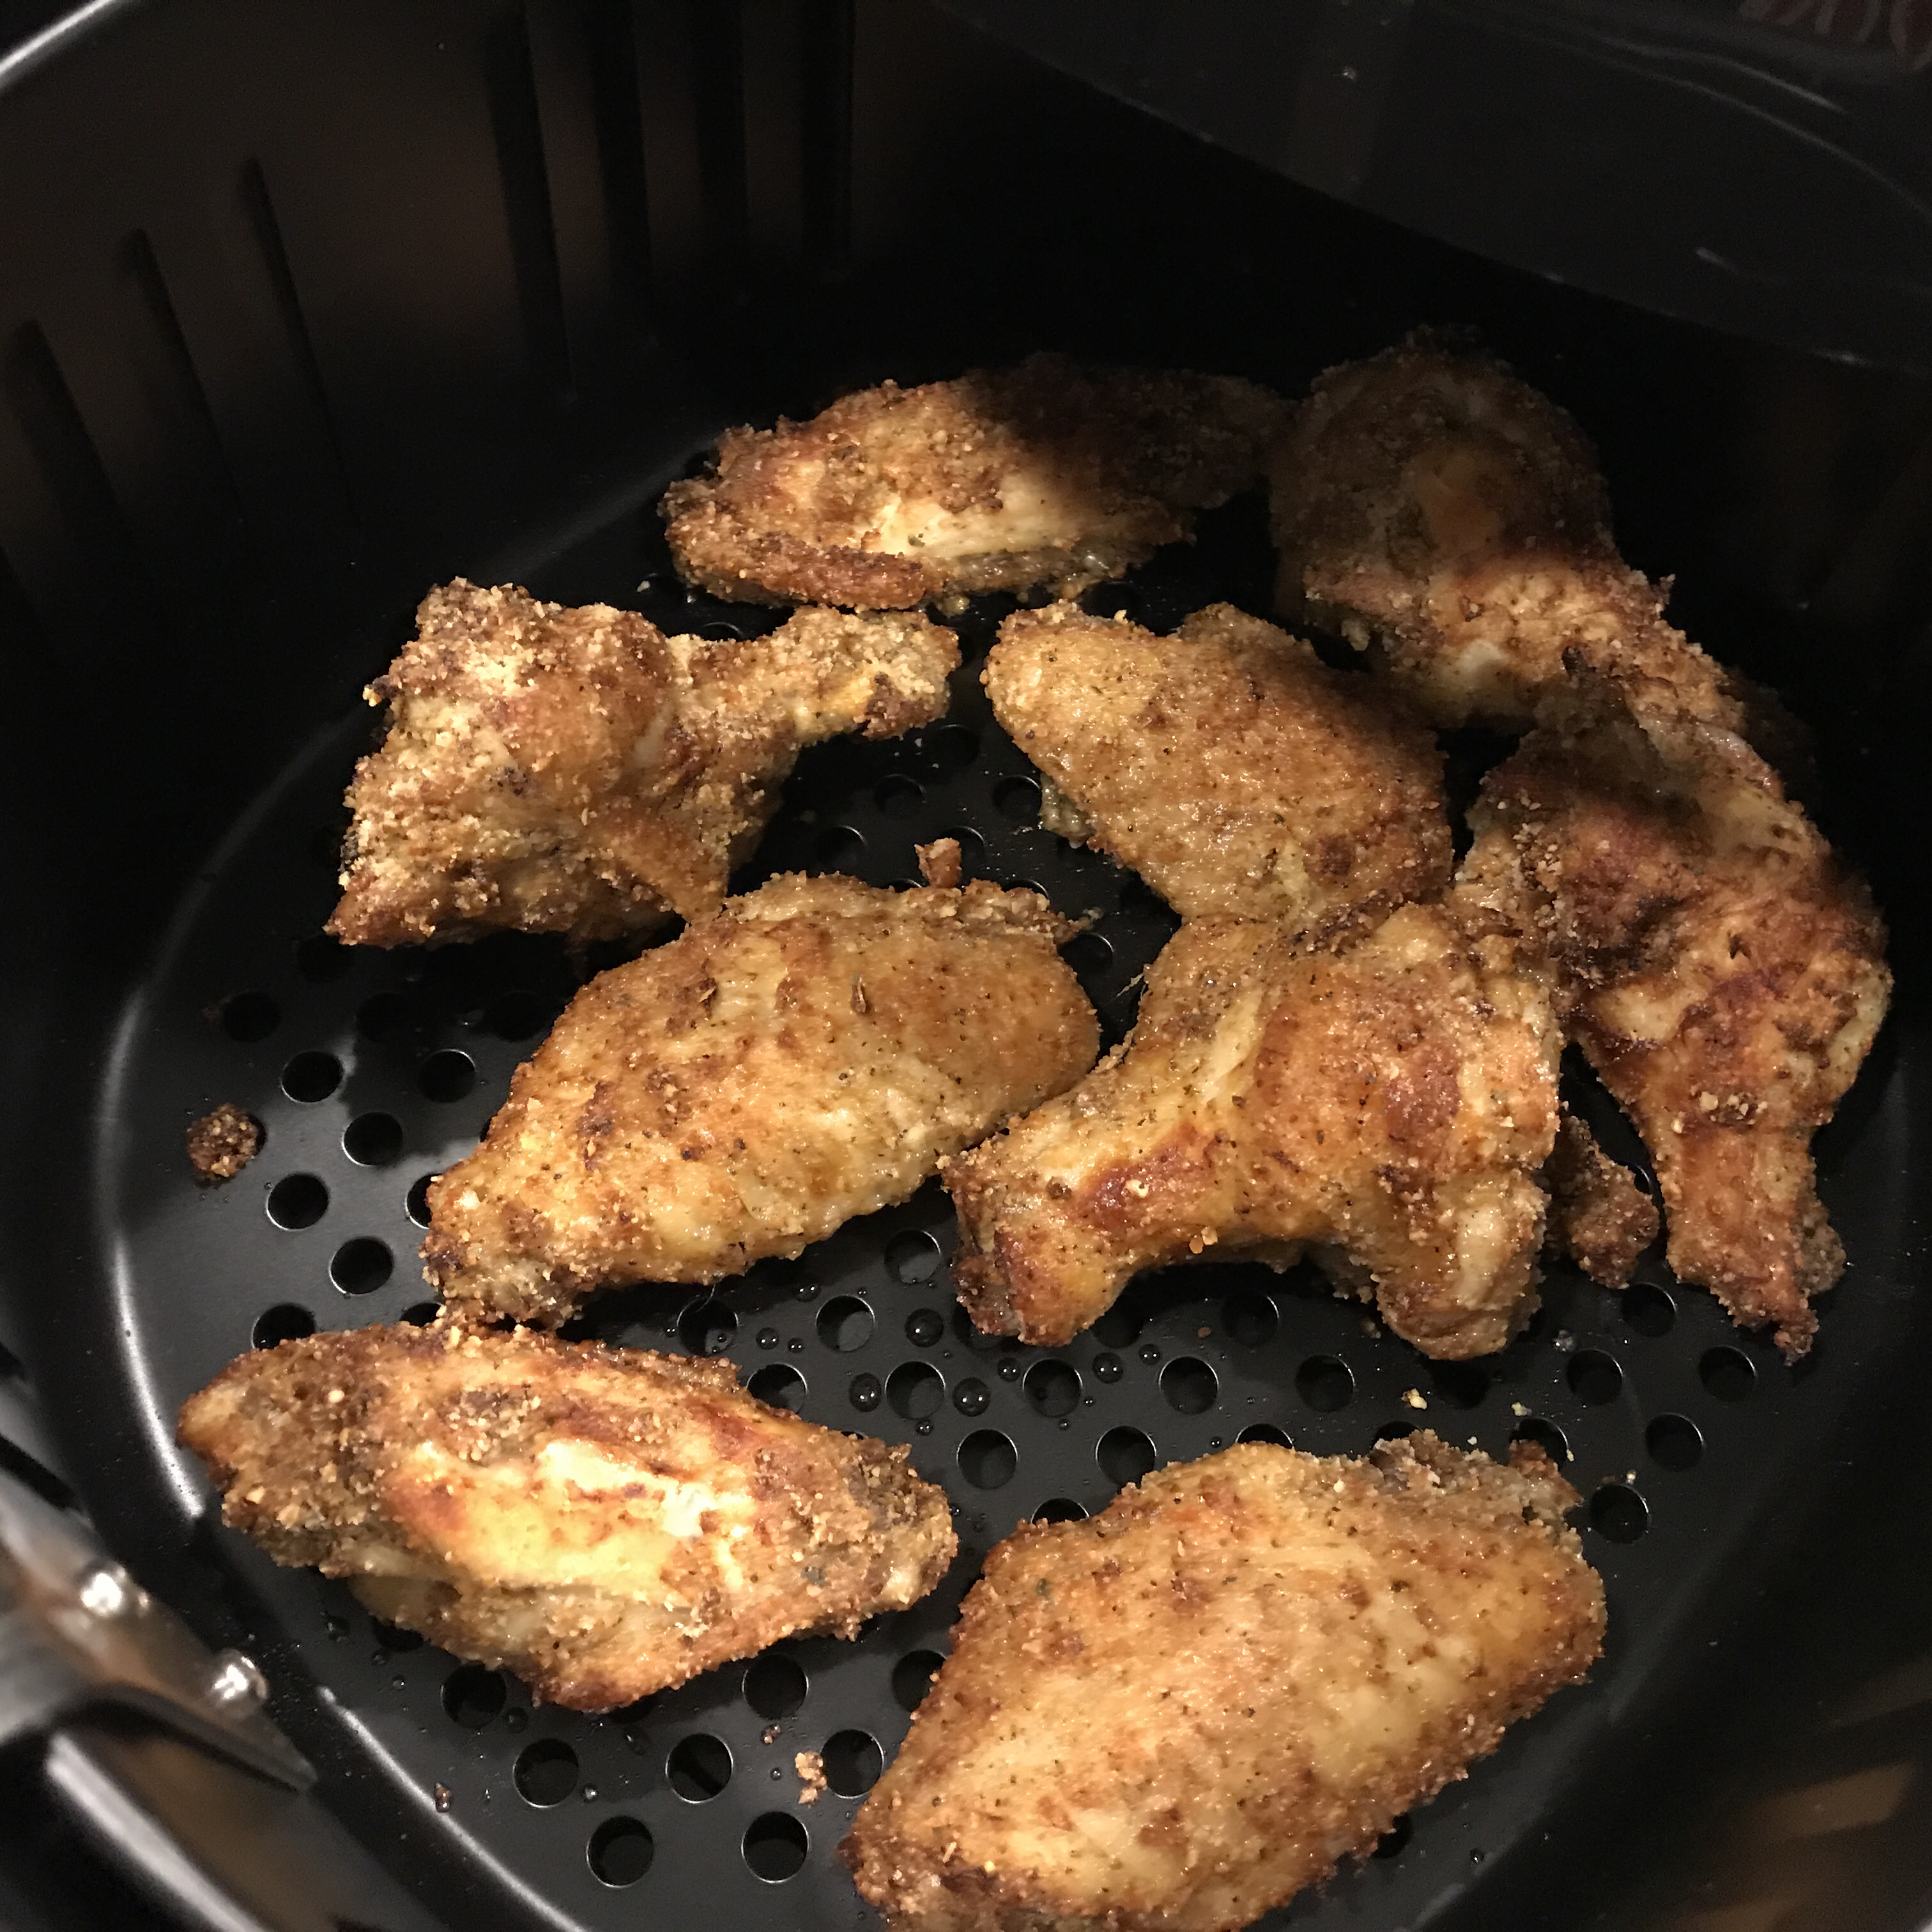 Garlic and Parmesan Chicken Wings